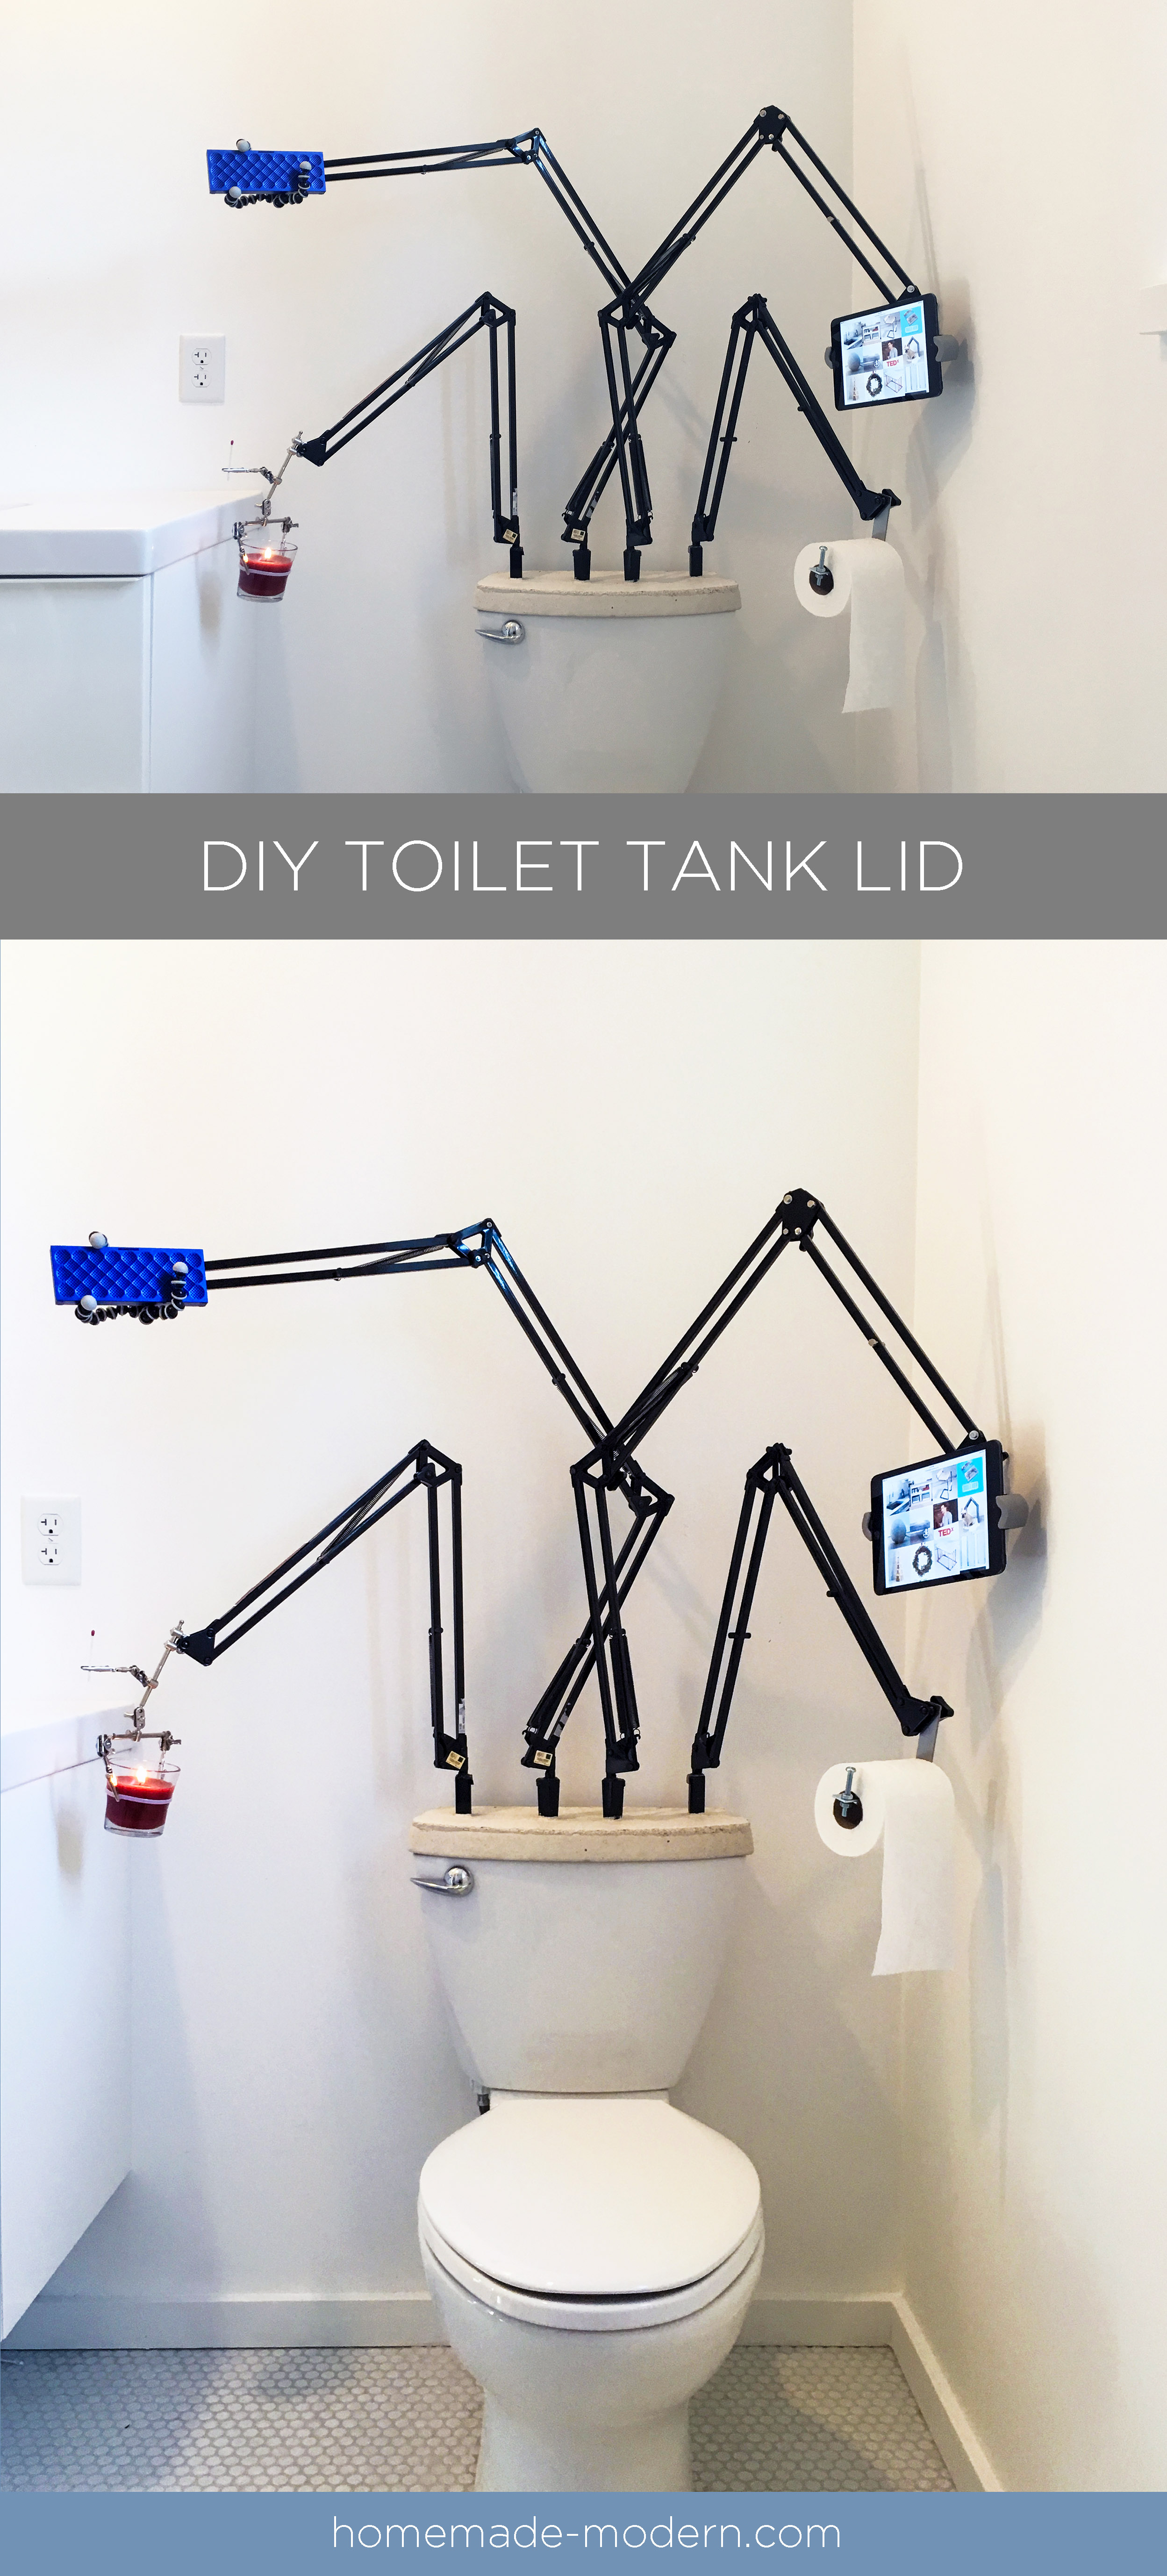 This DIY concrete toilet tank lid was made out of Quikrete countertop mix and some old adjustable lamps. For more information go to HomeMade-Modern.com